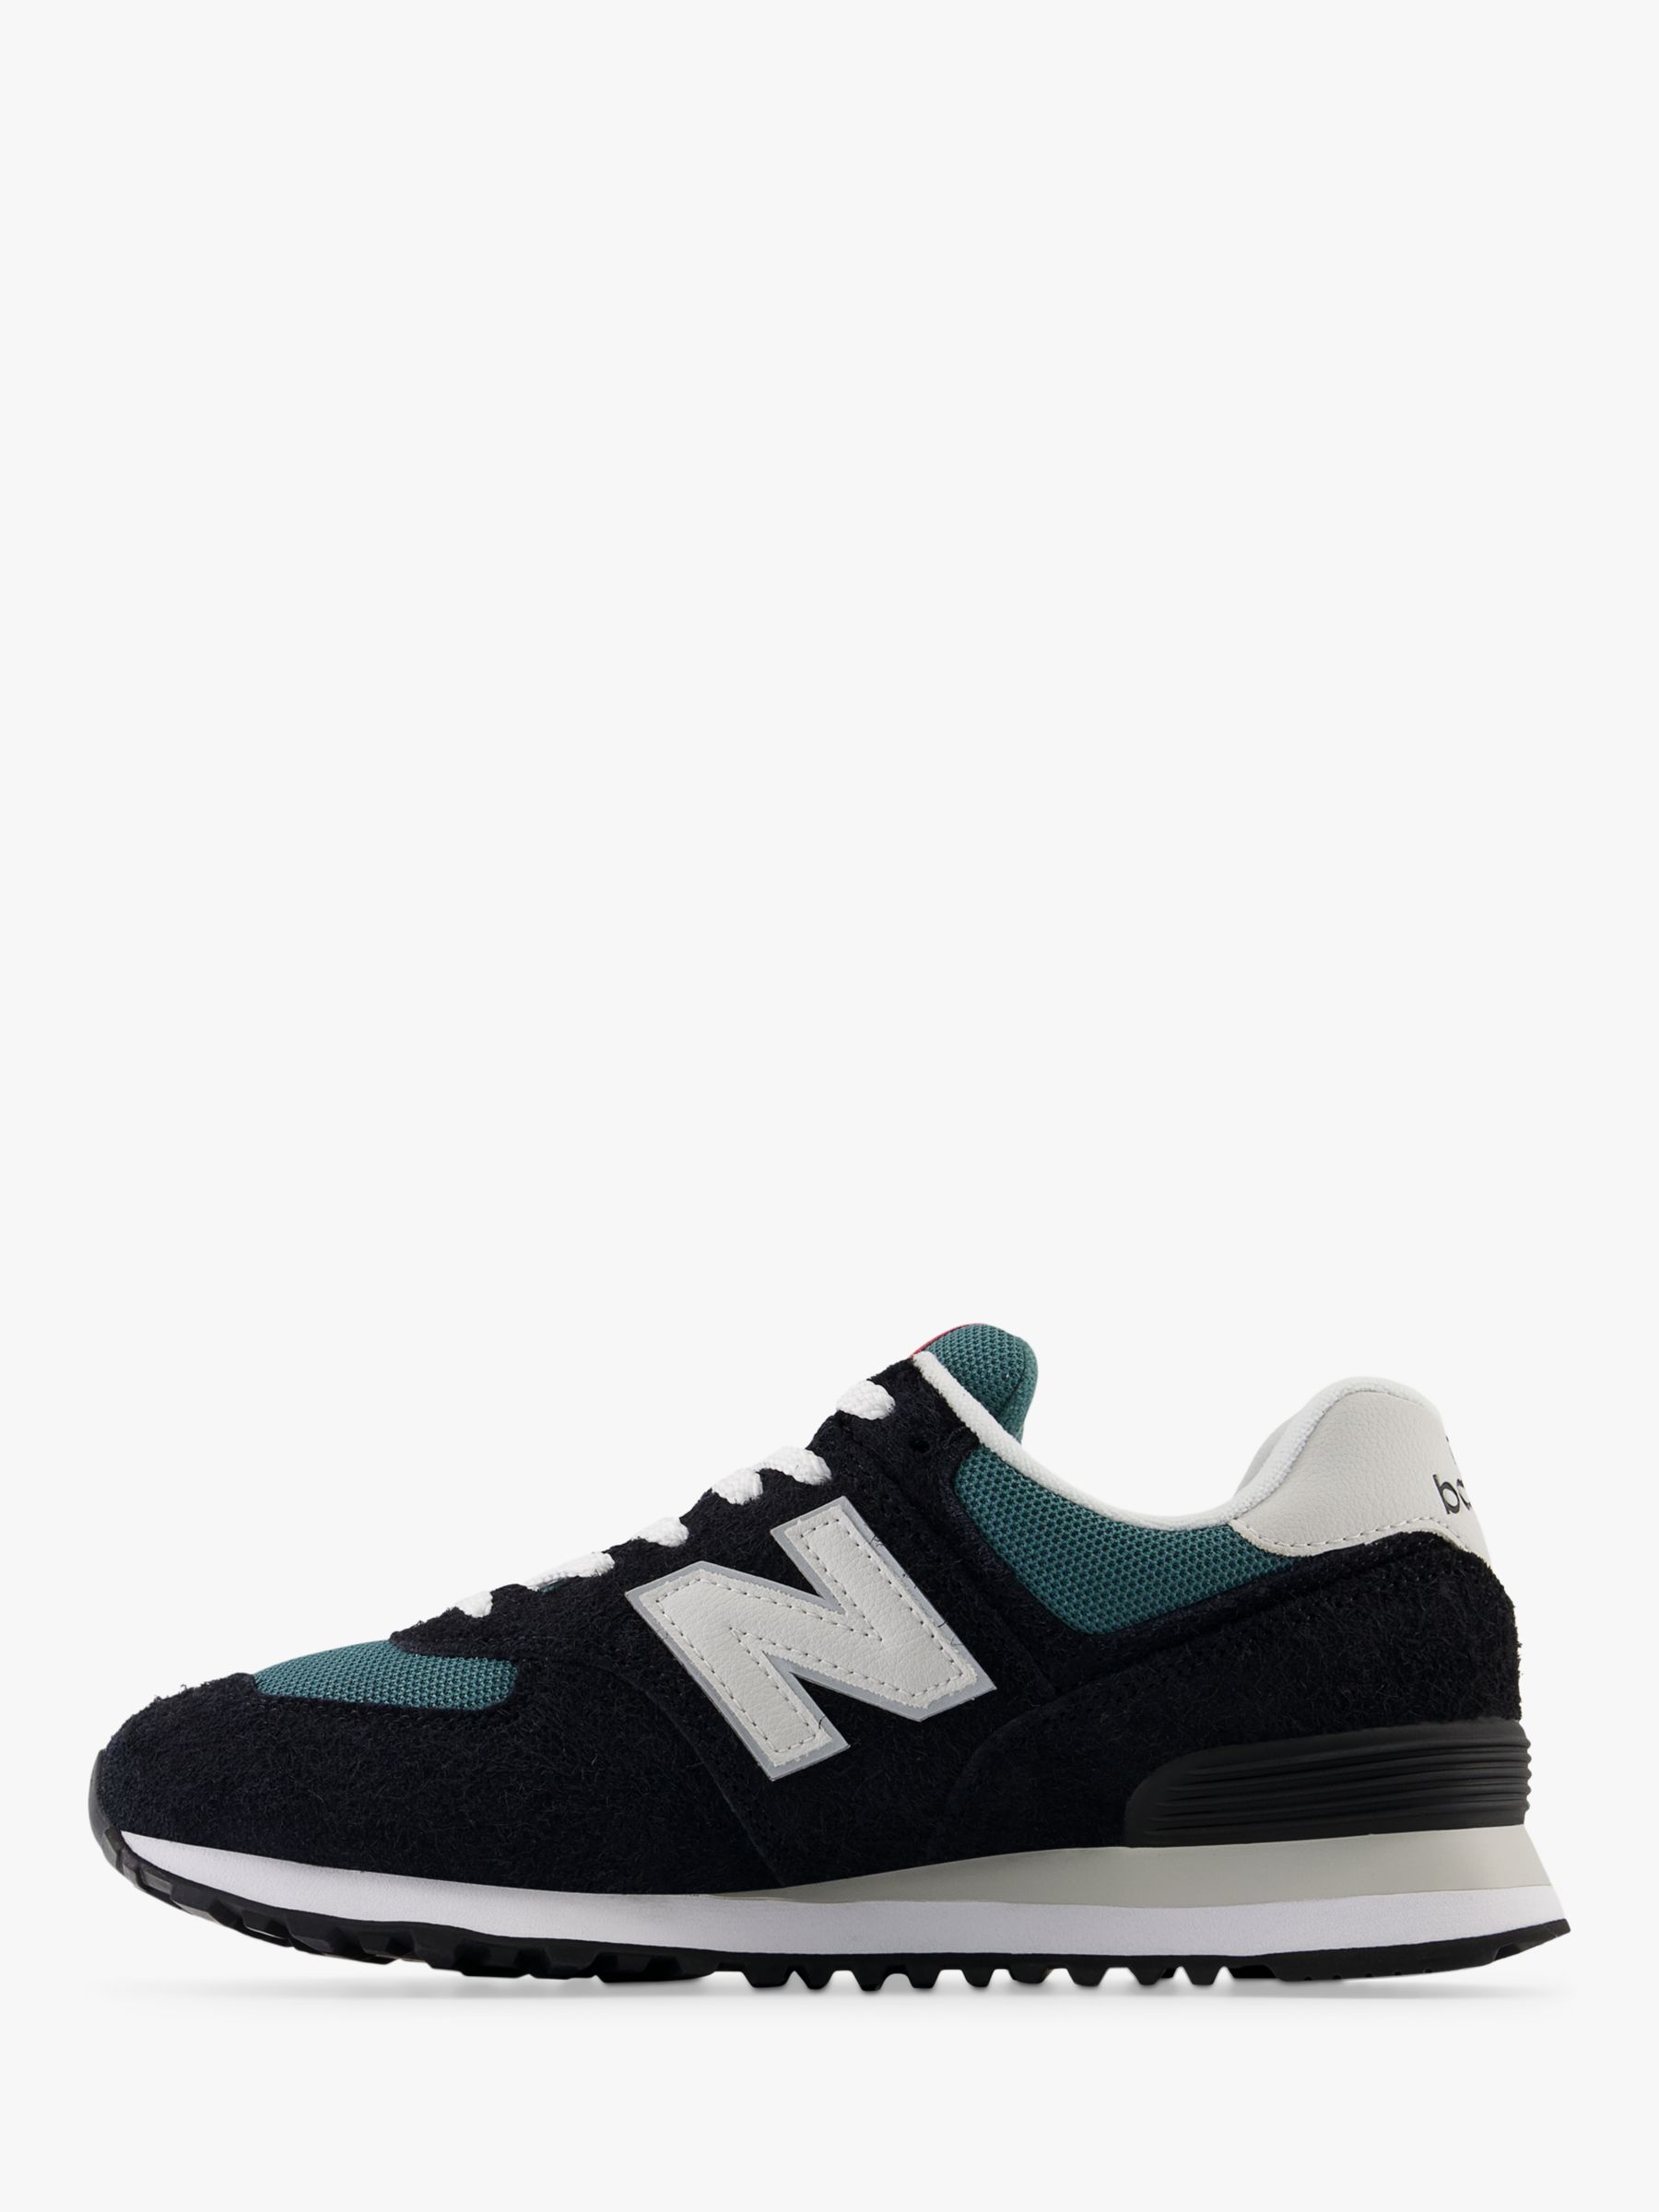 New Balance 574 Suede Trainers, Black Blue at John Lewis & Partners